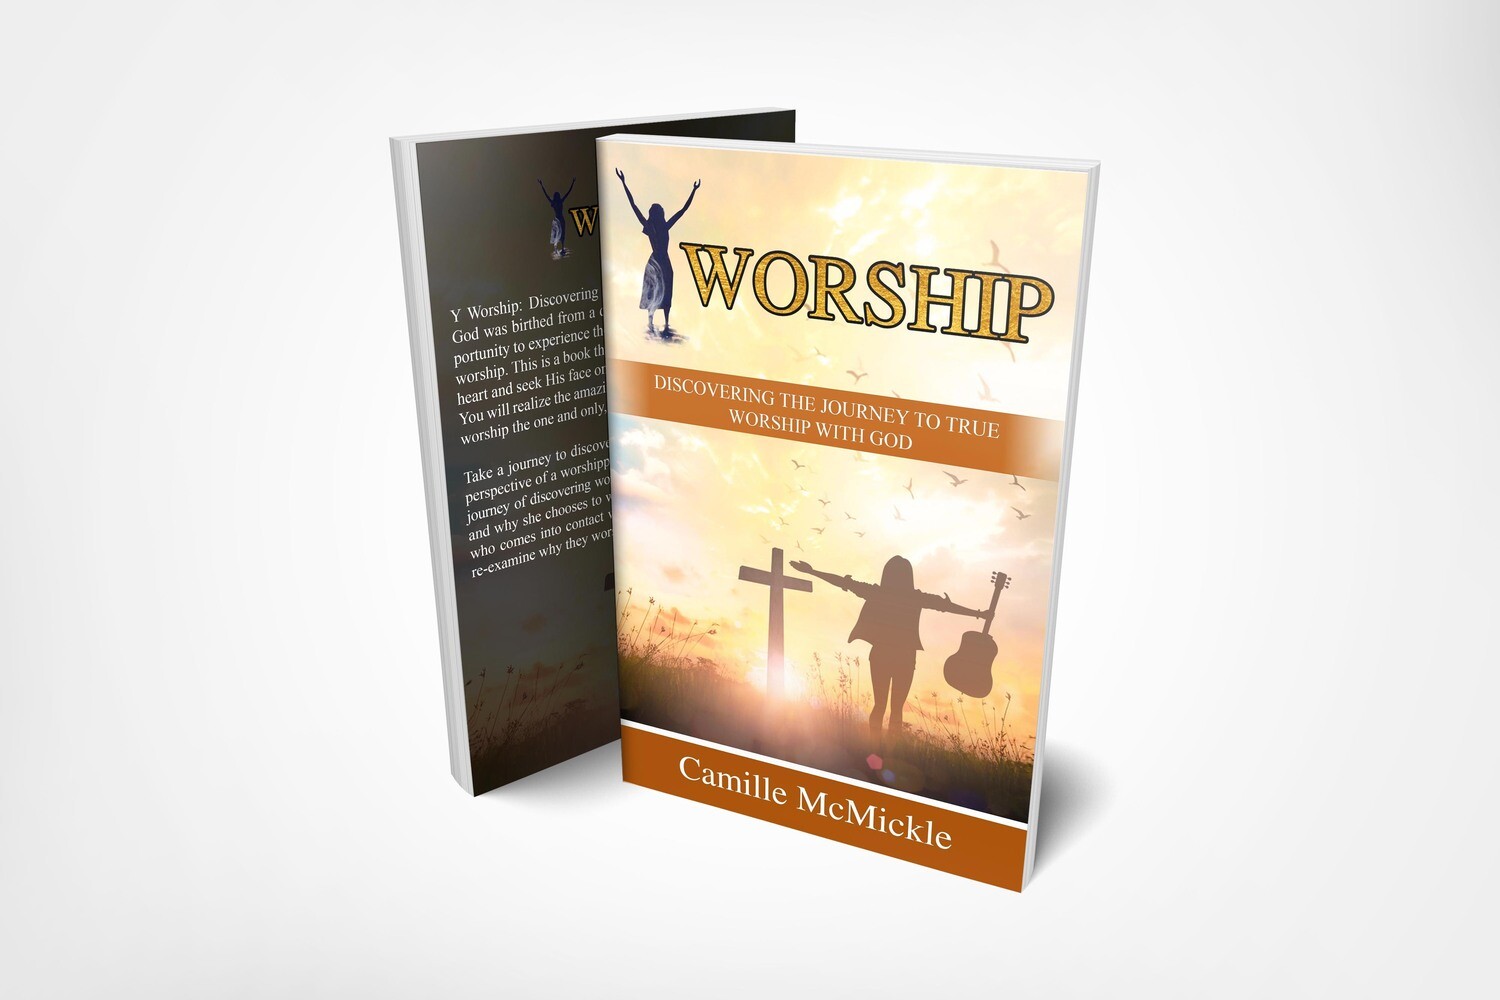 "Y Worship", Discovering The Journey to True Worship With God